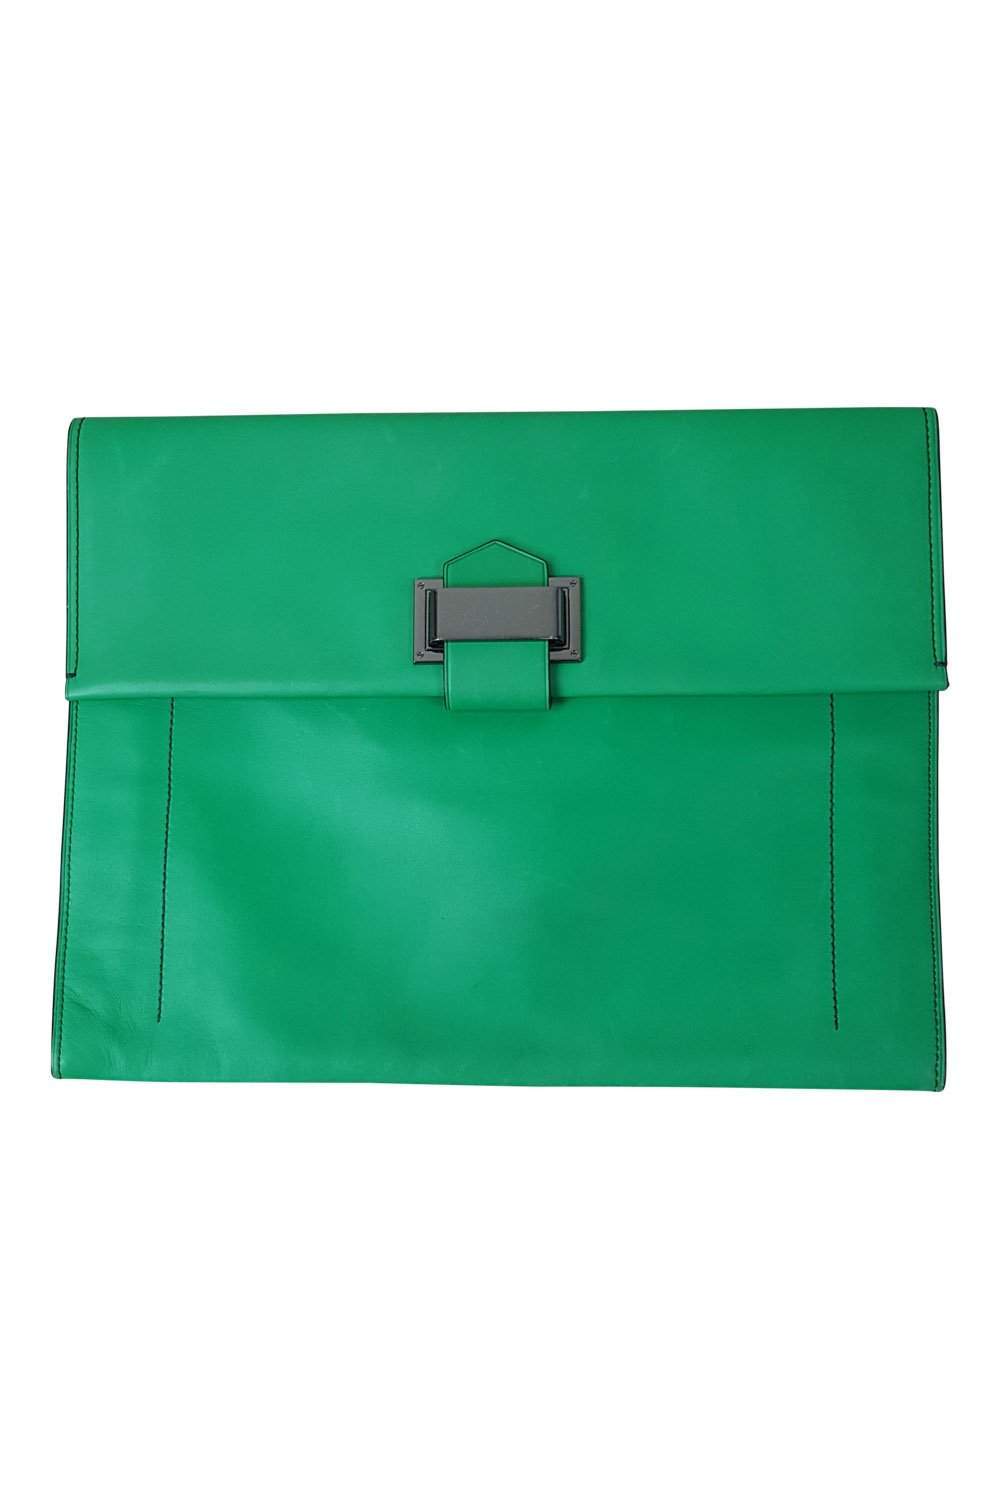 REED KRAKOFF Large Green leather Clutch Bag-Reed Krakoff-The Freperie